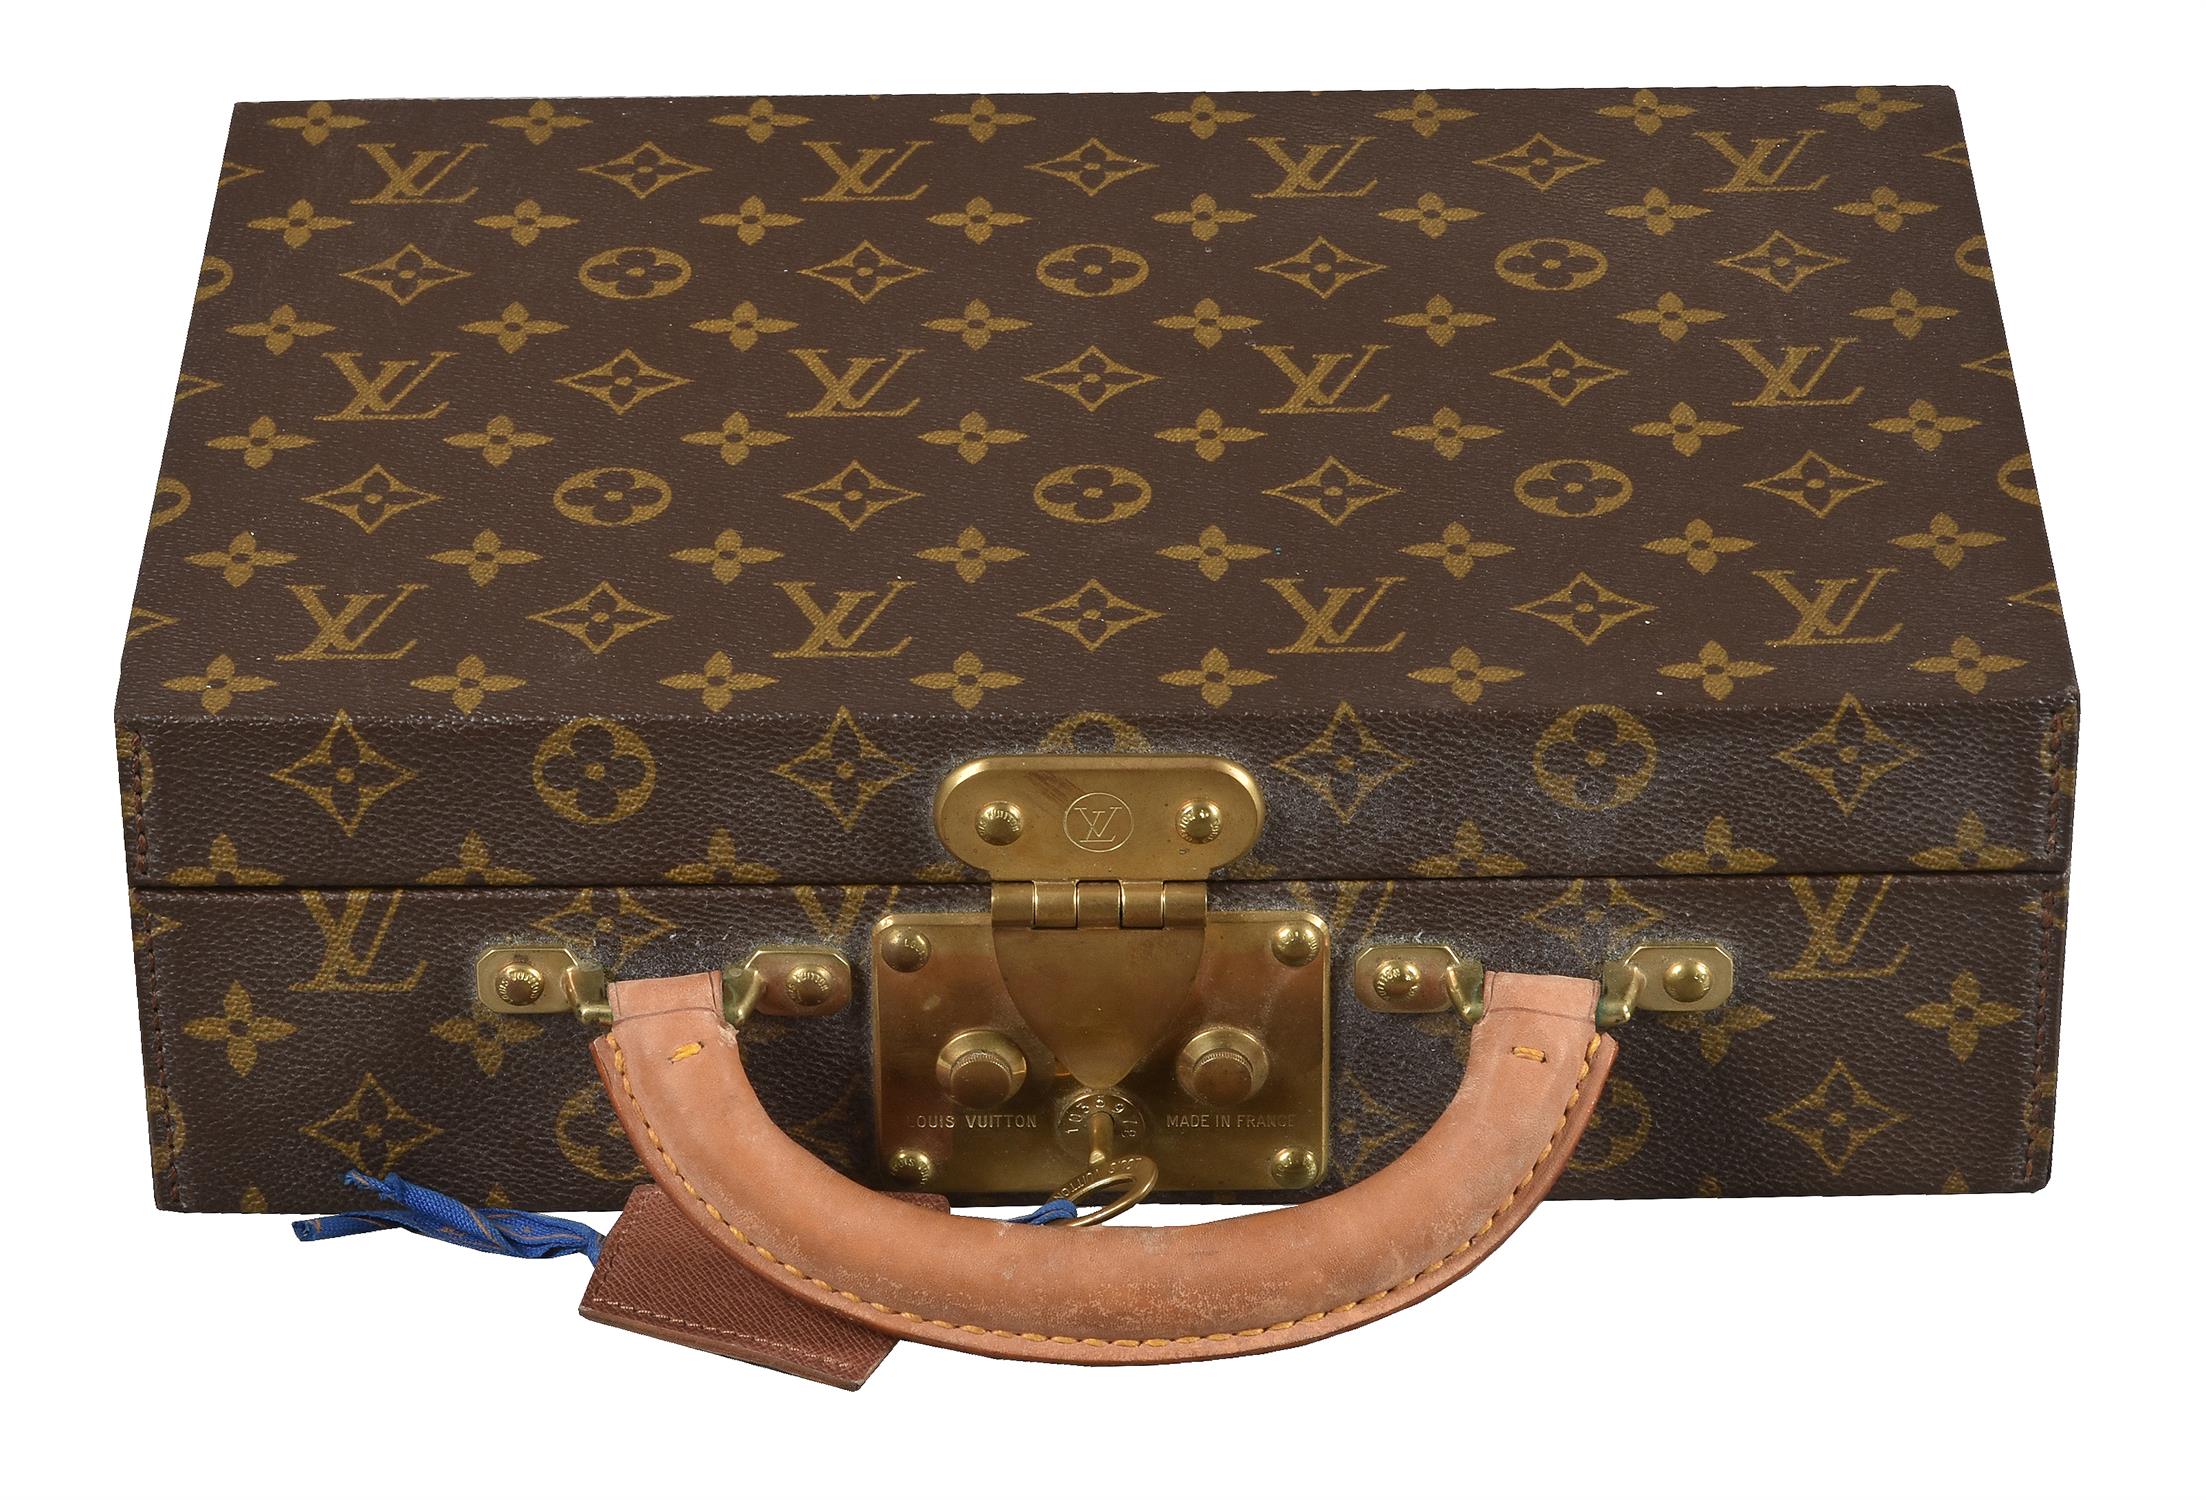 Louis Vuitton, a monogrammed jewellery case - Image 2 of 3